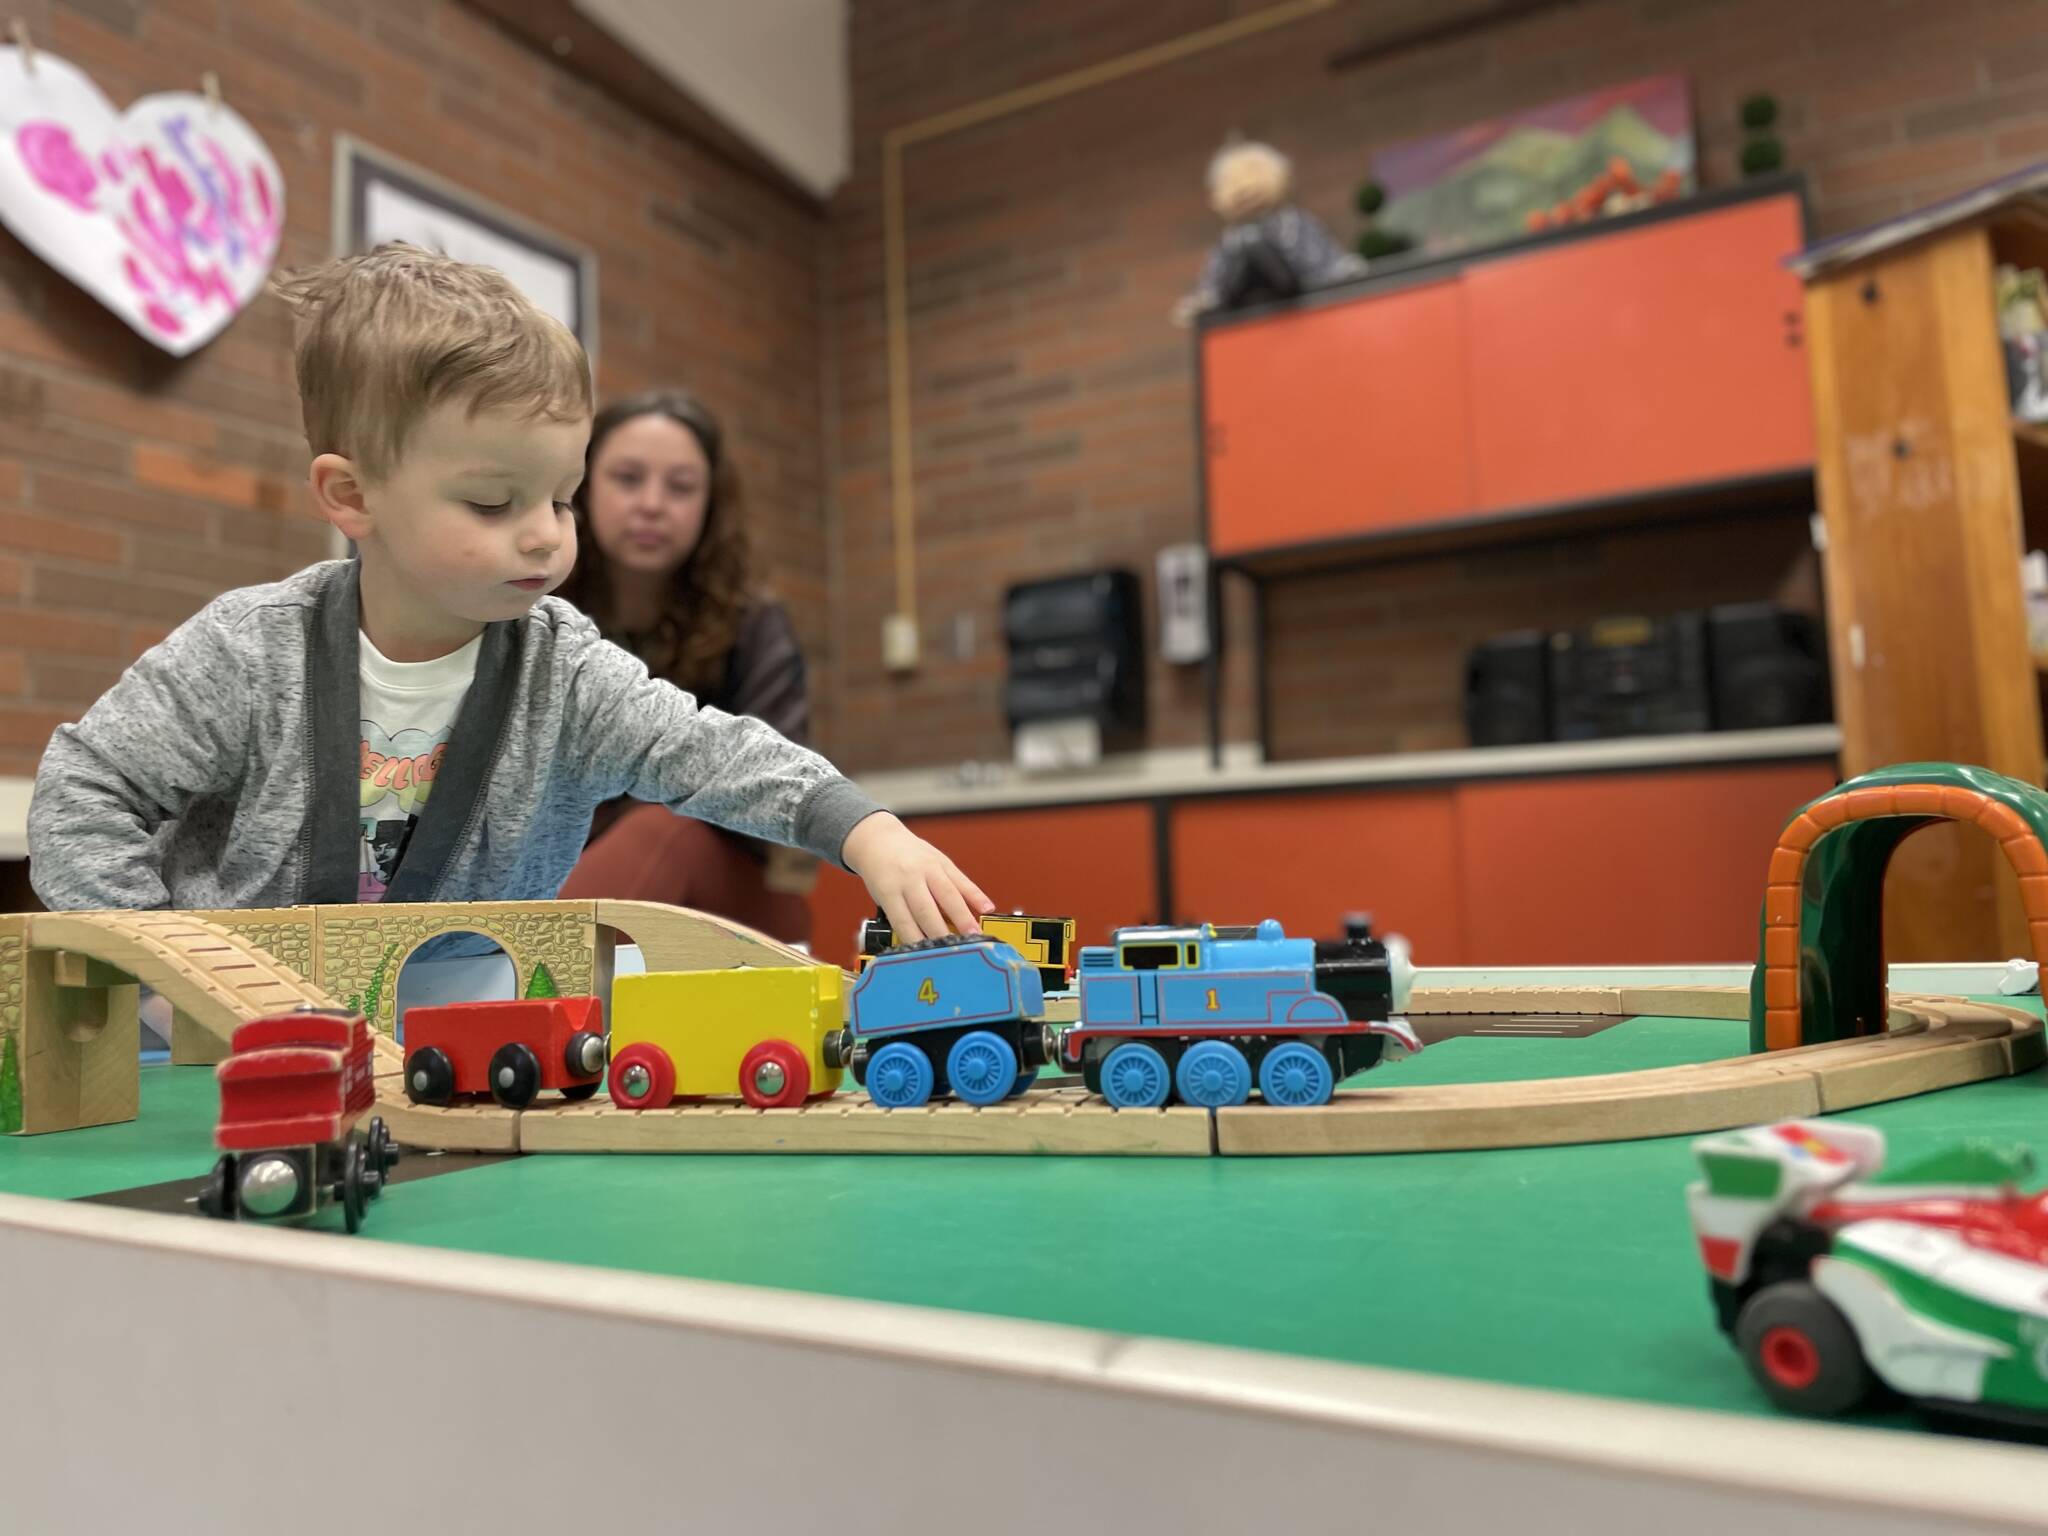 Photo provided
Ewan, 2, plays with a train at Playscape while his mom Lindsey McCoy watches.